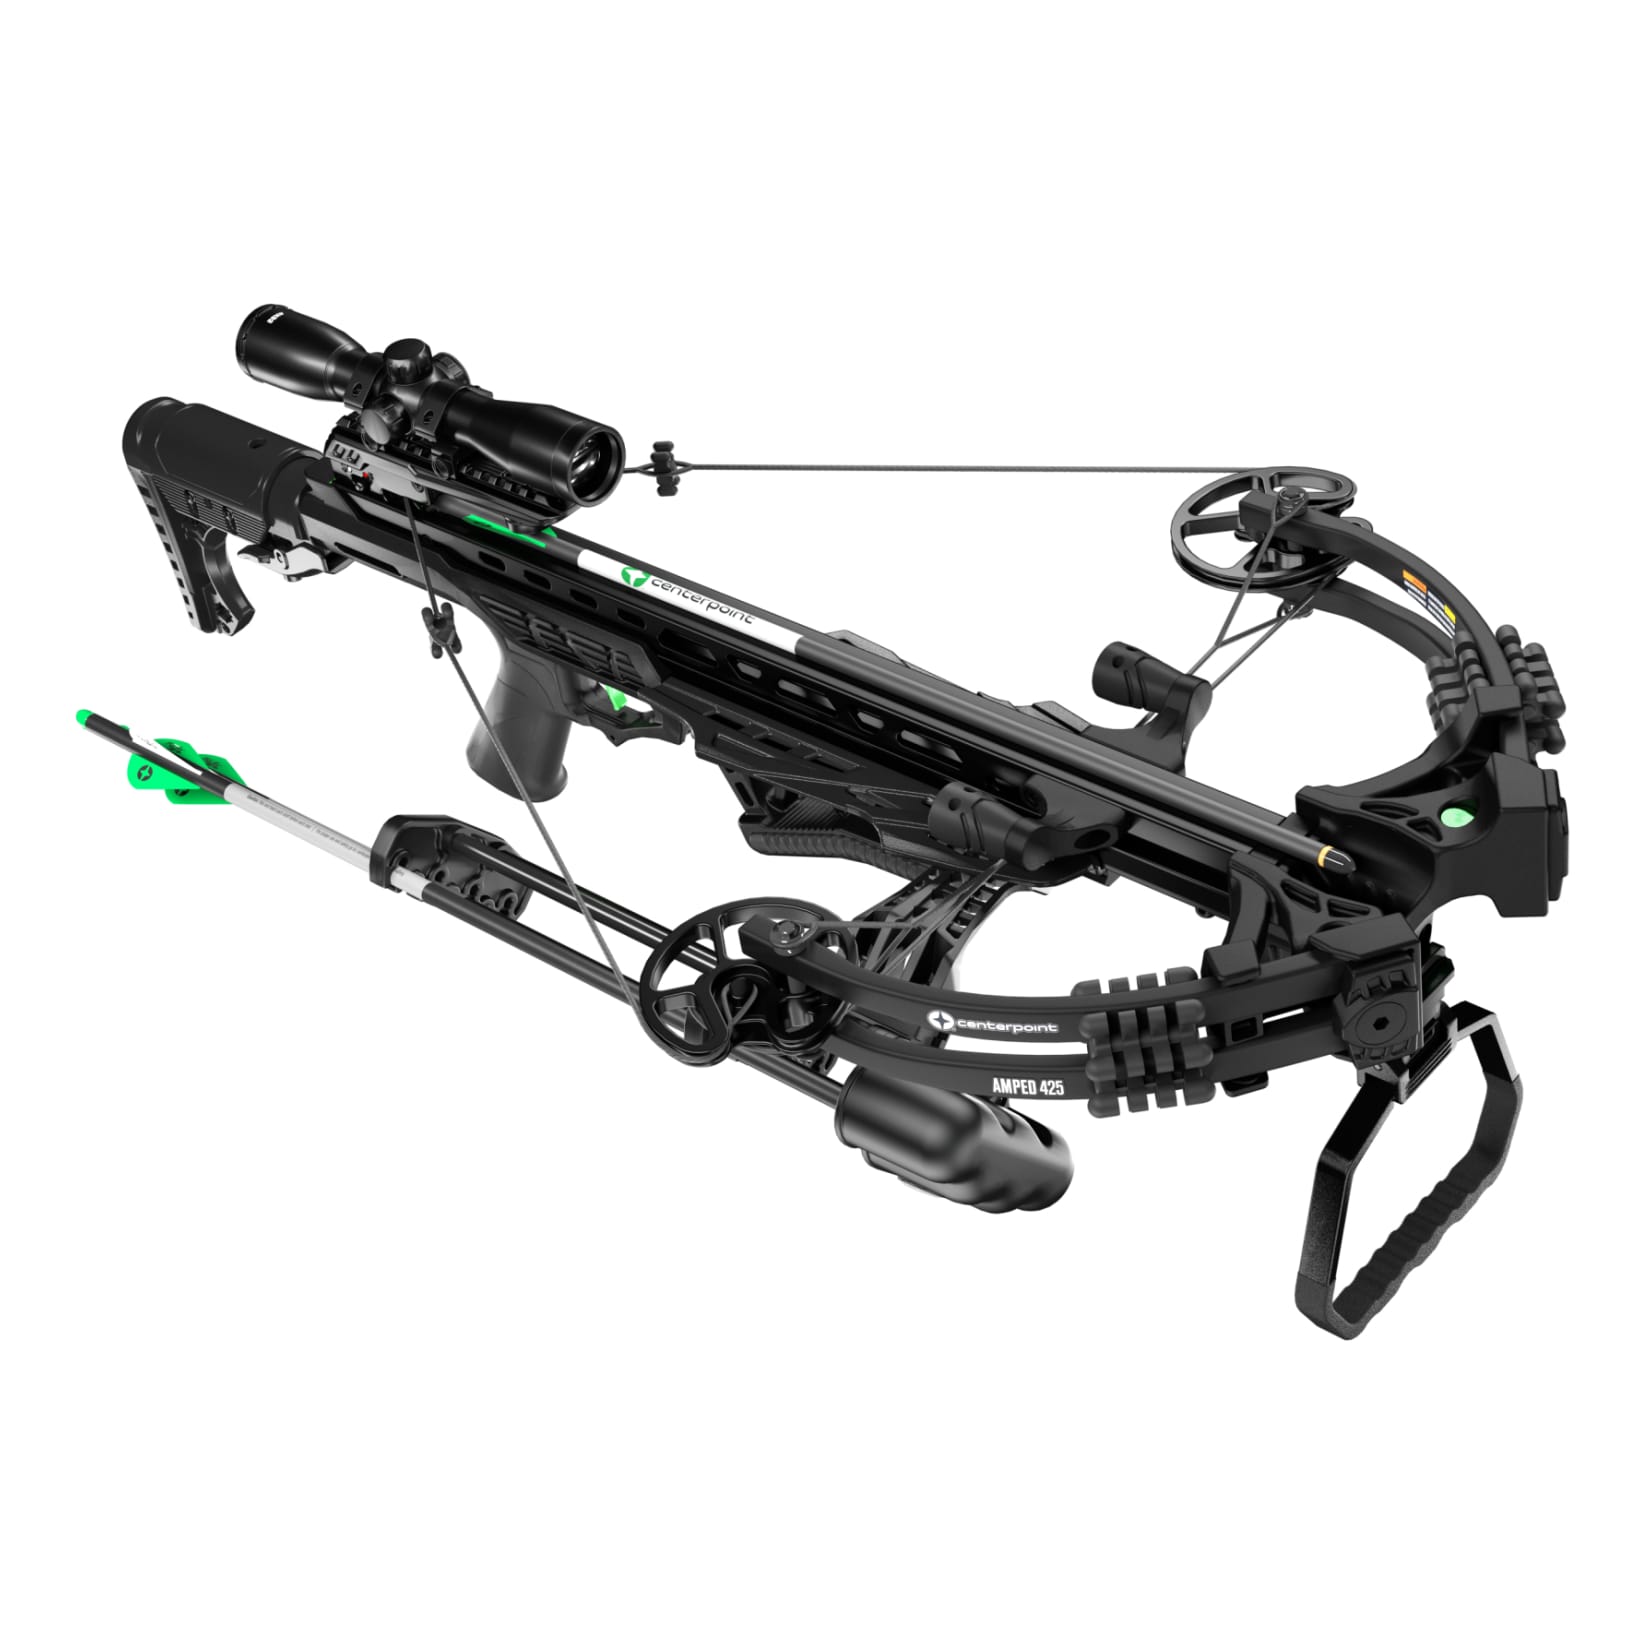 CenterPoint® Amped™ 425 Compound Crossbow with Silent Crank Cocking Device